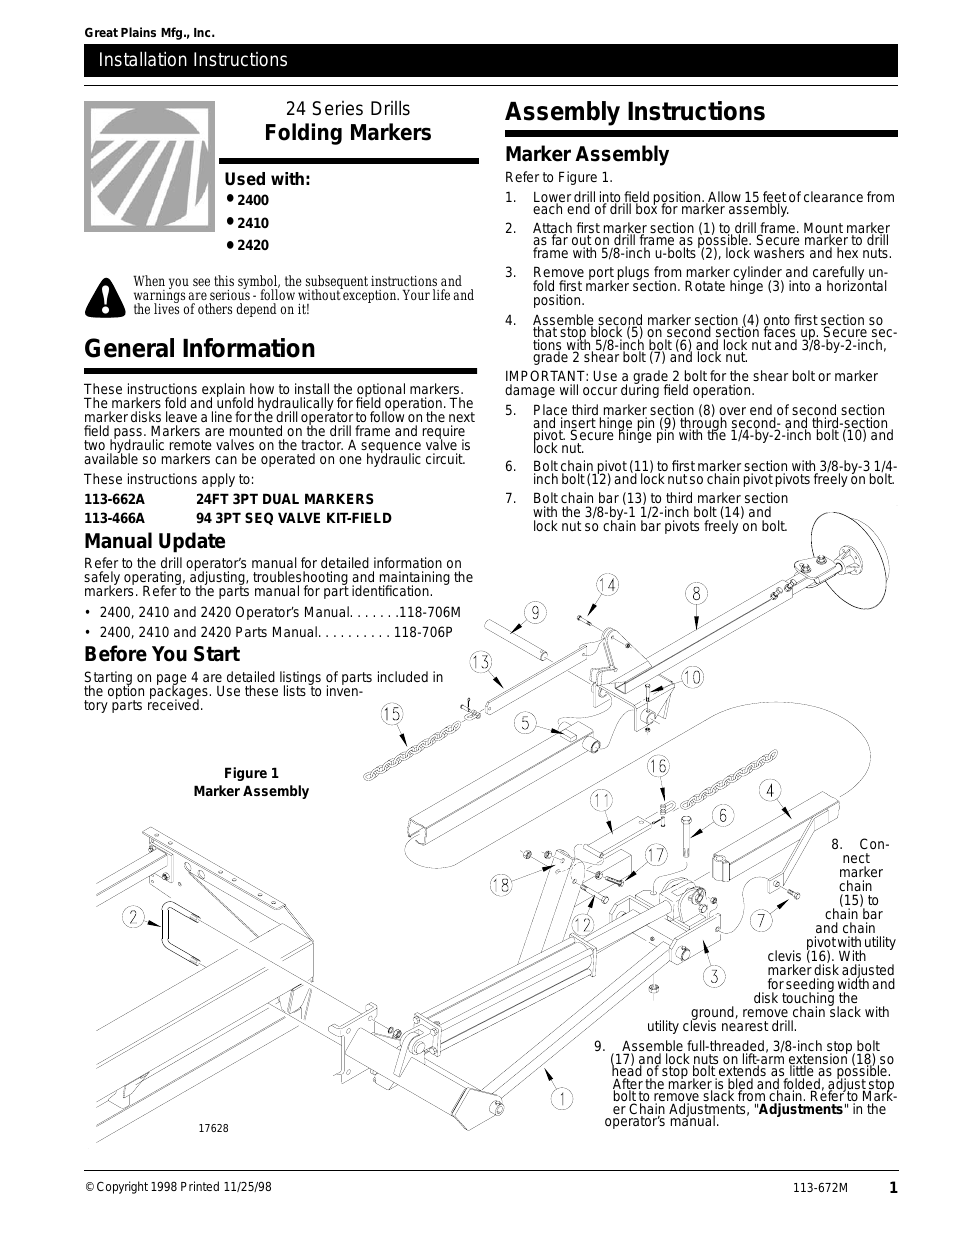 24 Series Drills Assembly Instructions